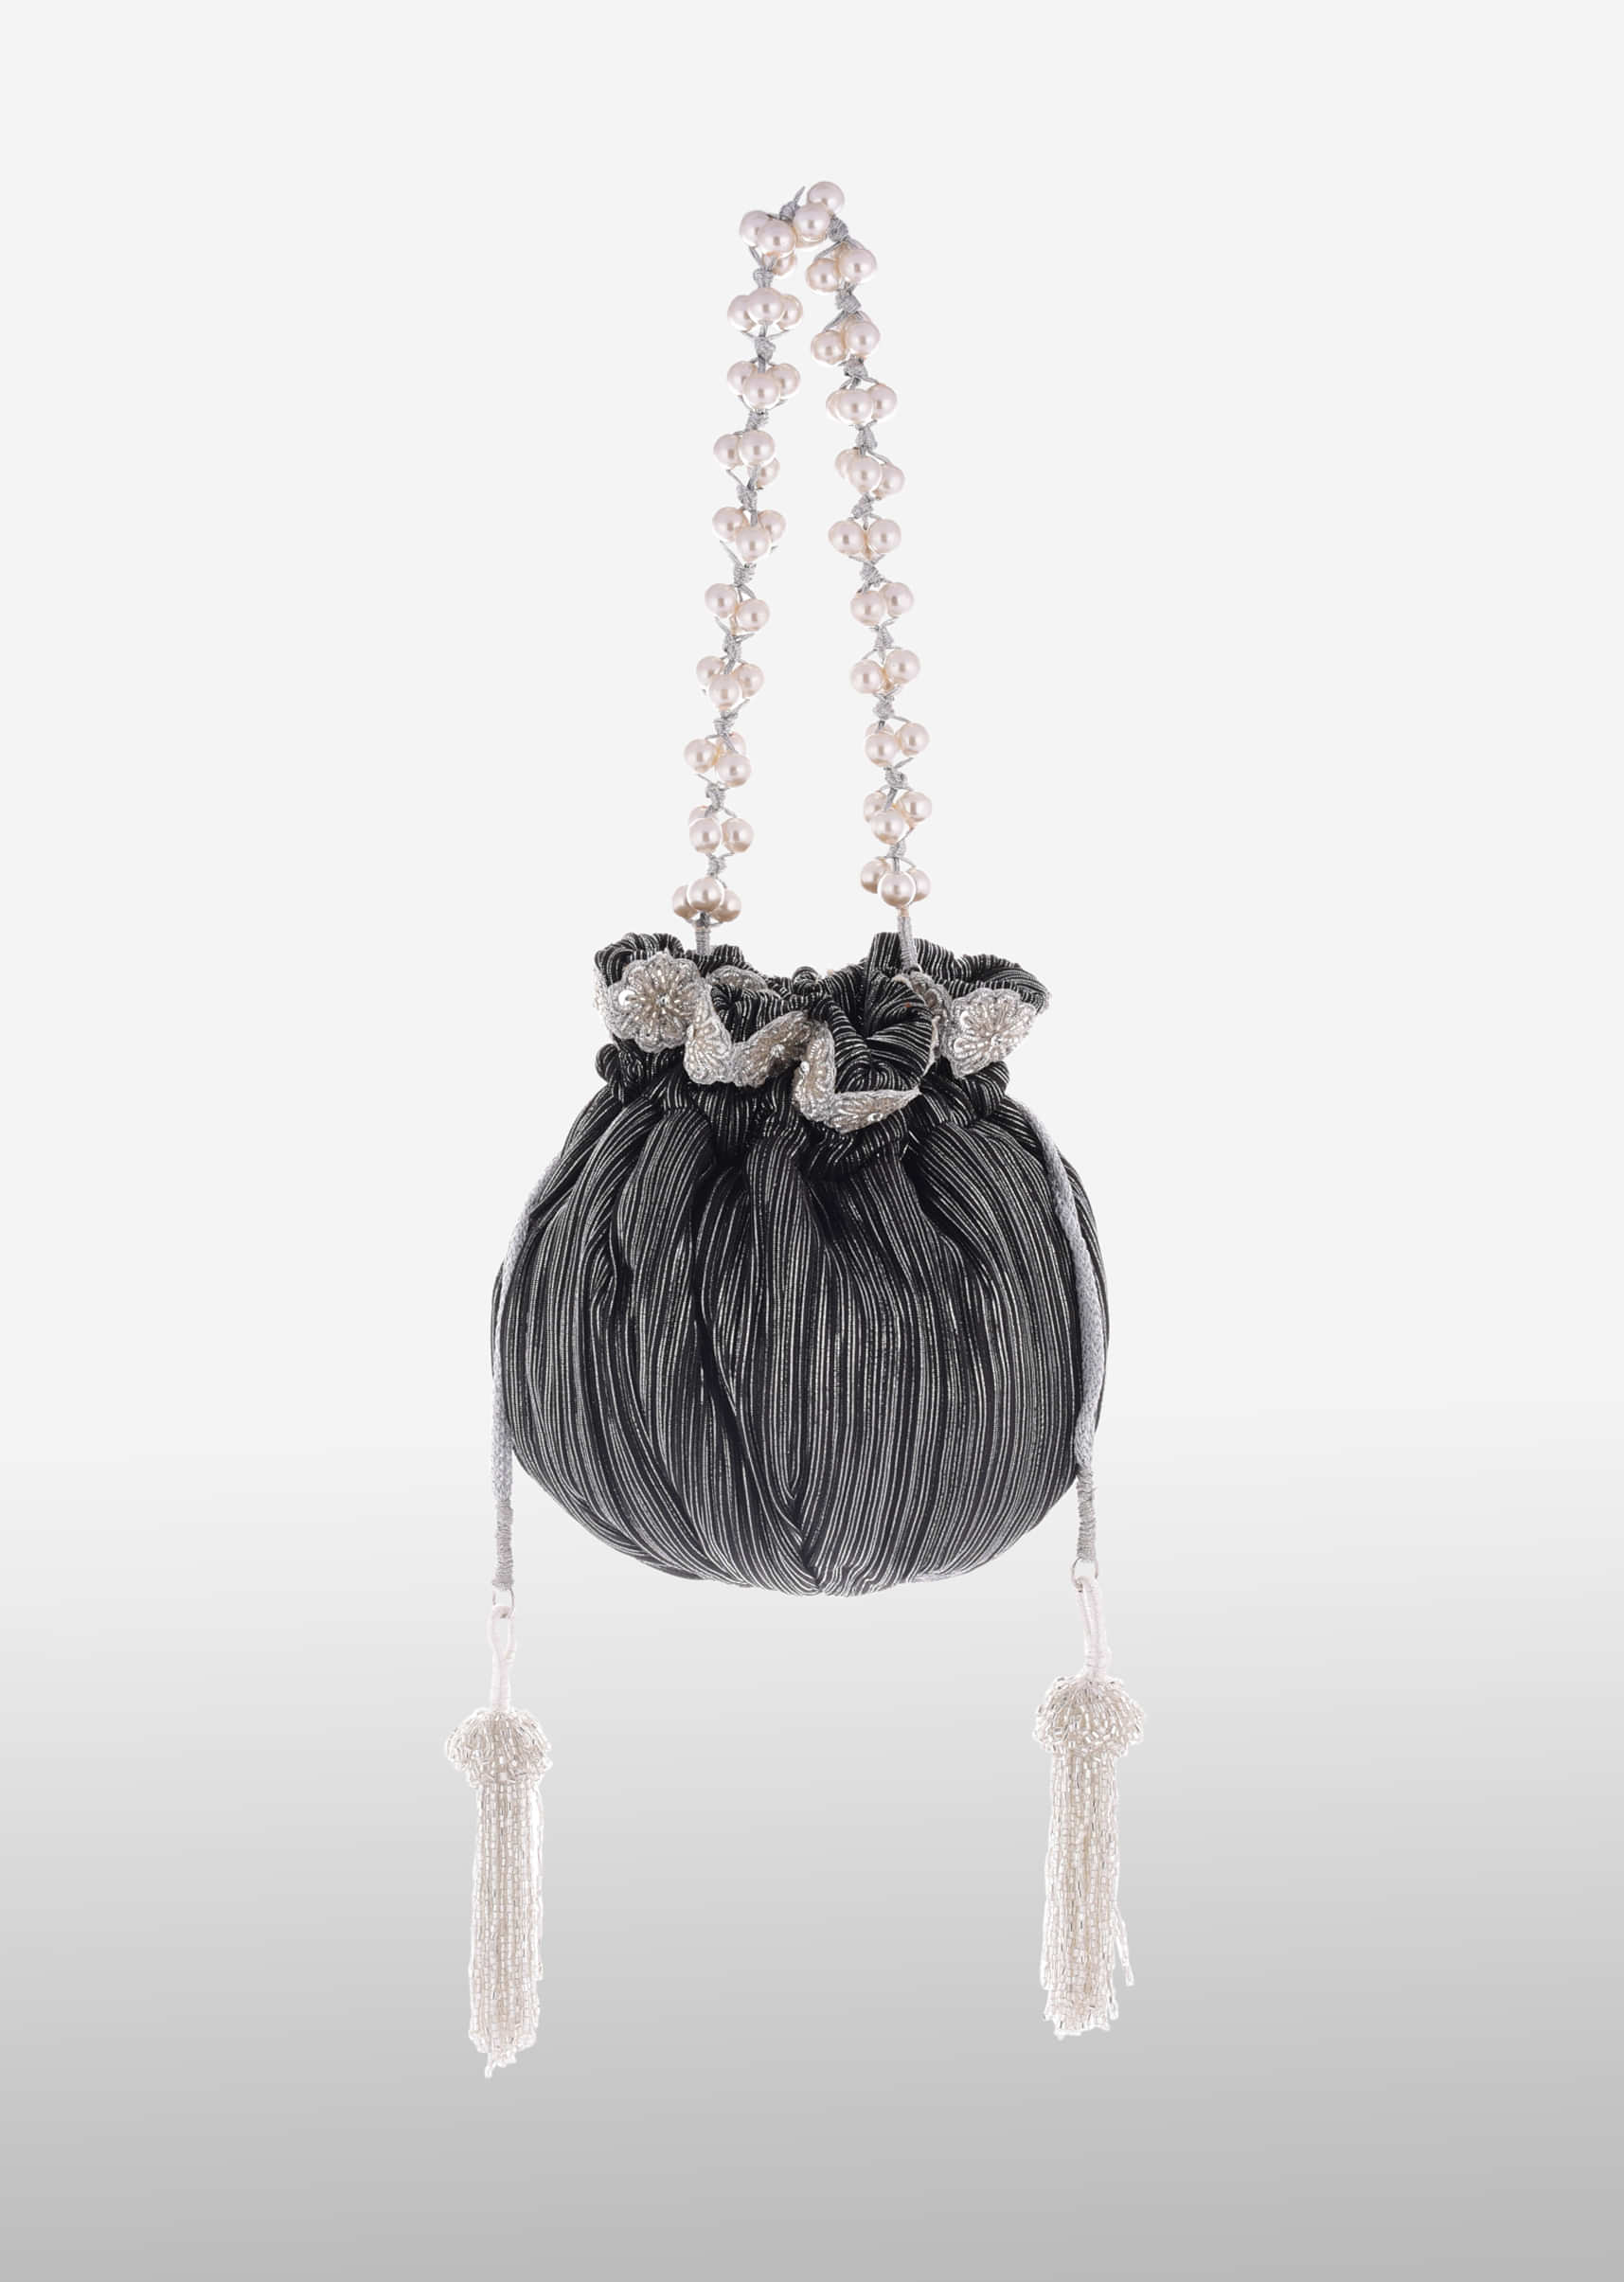 Black And Silver Potli Bag In Silk With Woven Silver Stripes And Cut Dana Embroidery Online - Kalki Fashion